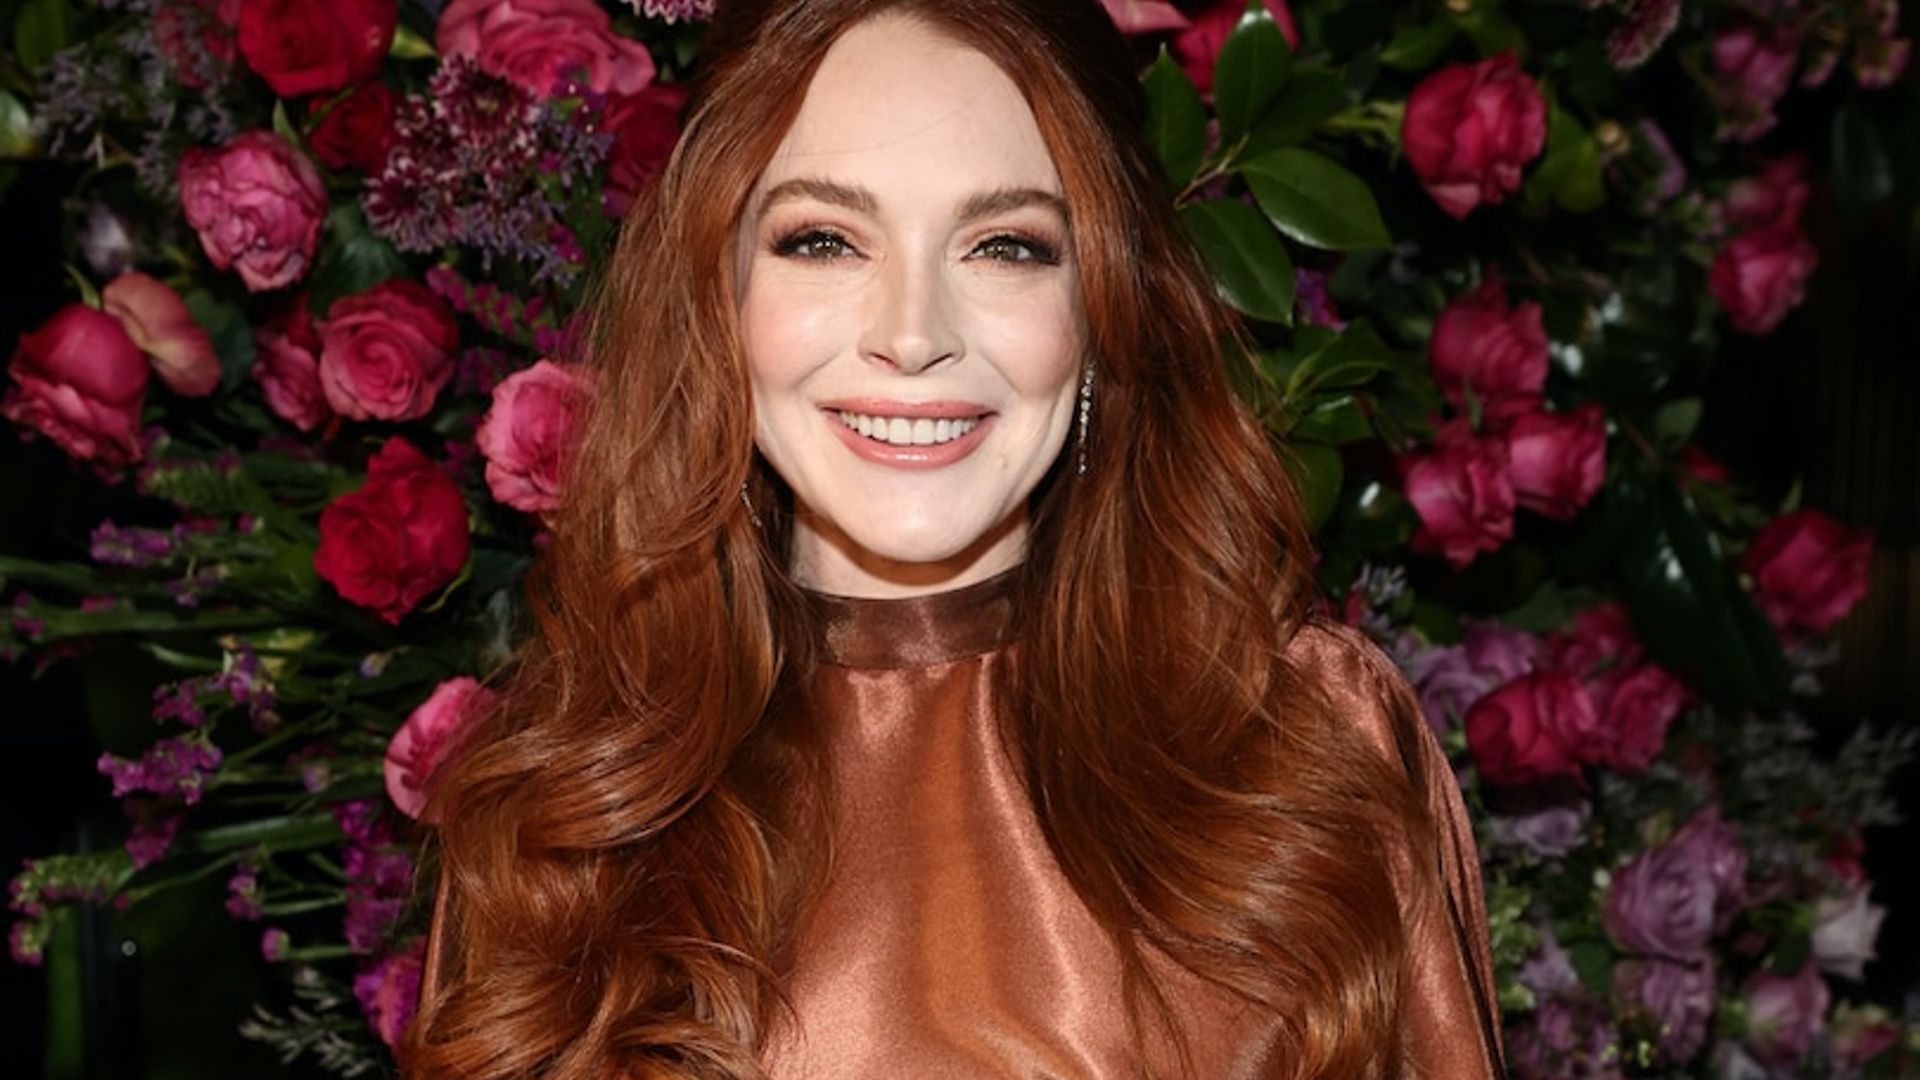 Lindsay Lohan attends the Christian Siriano Fall/Winter 2023 fashion show on Feb. 9, 2023, in New York. (Jamie McCarthy/New York Daily News/Tribune News Service via Getty Images)